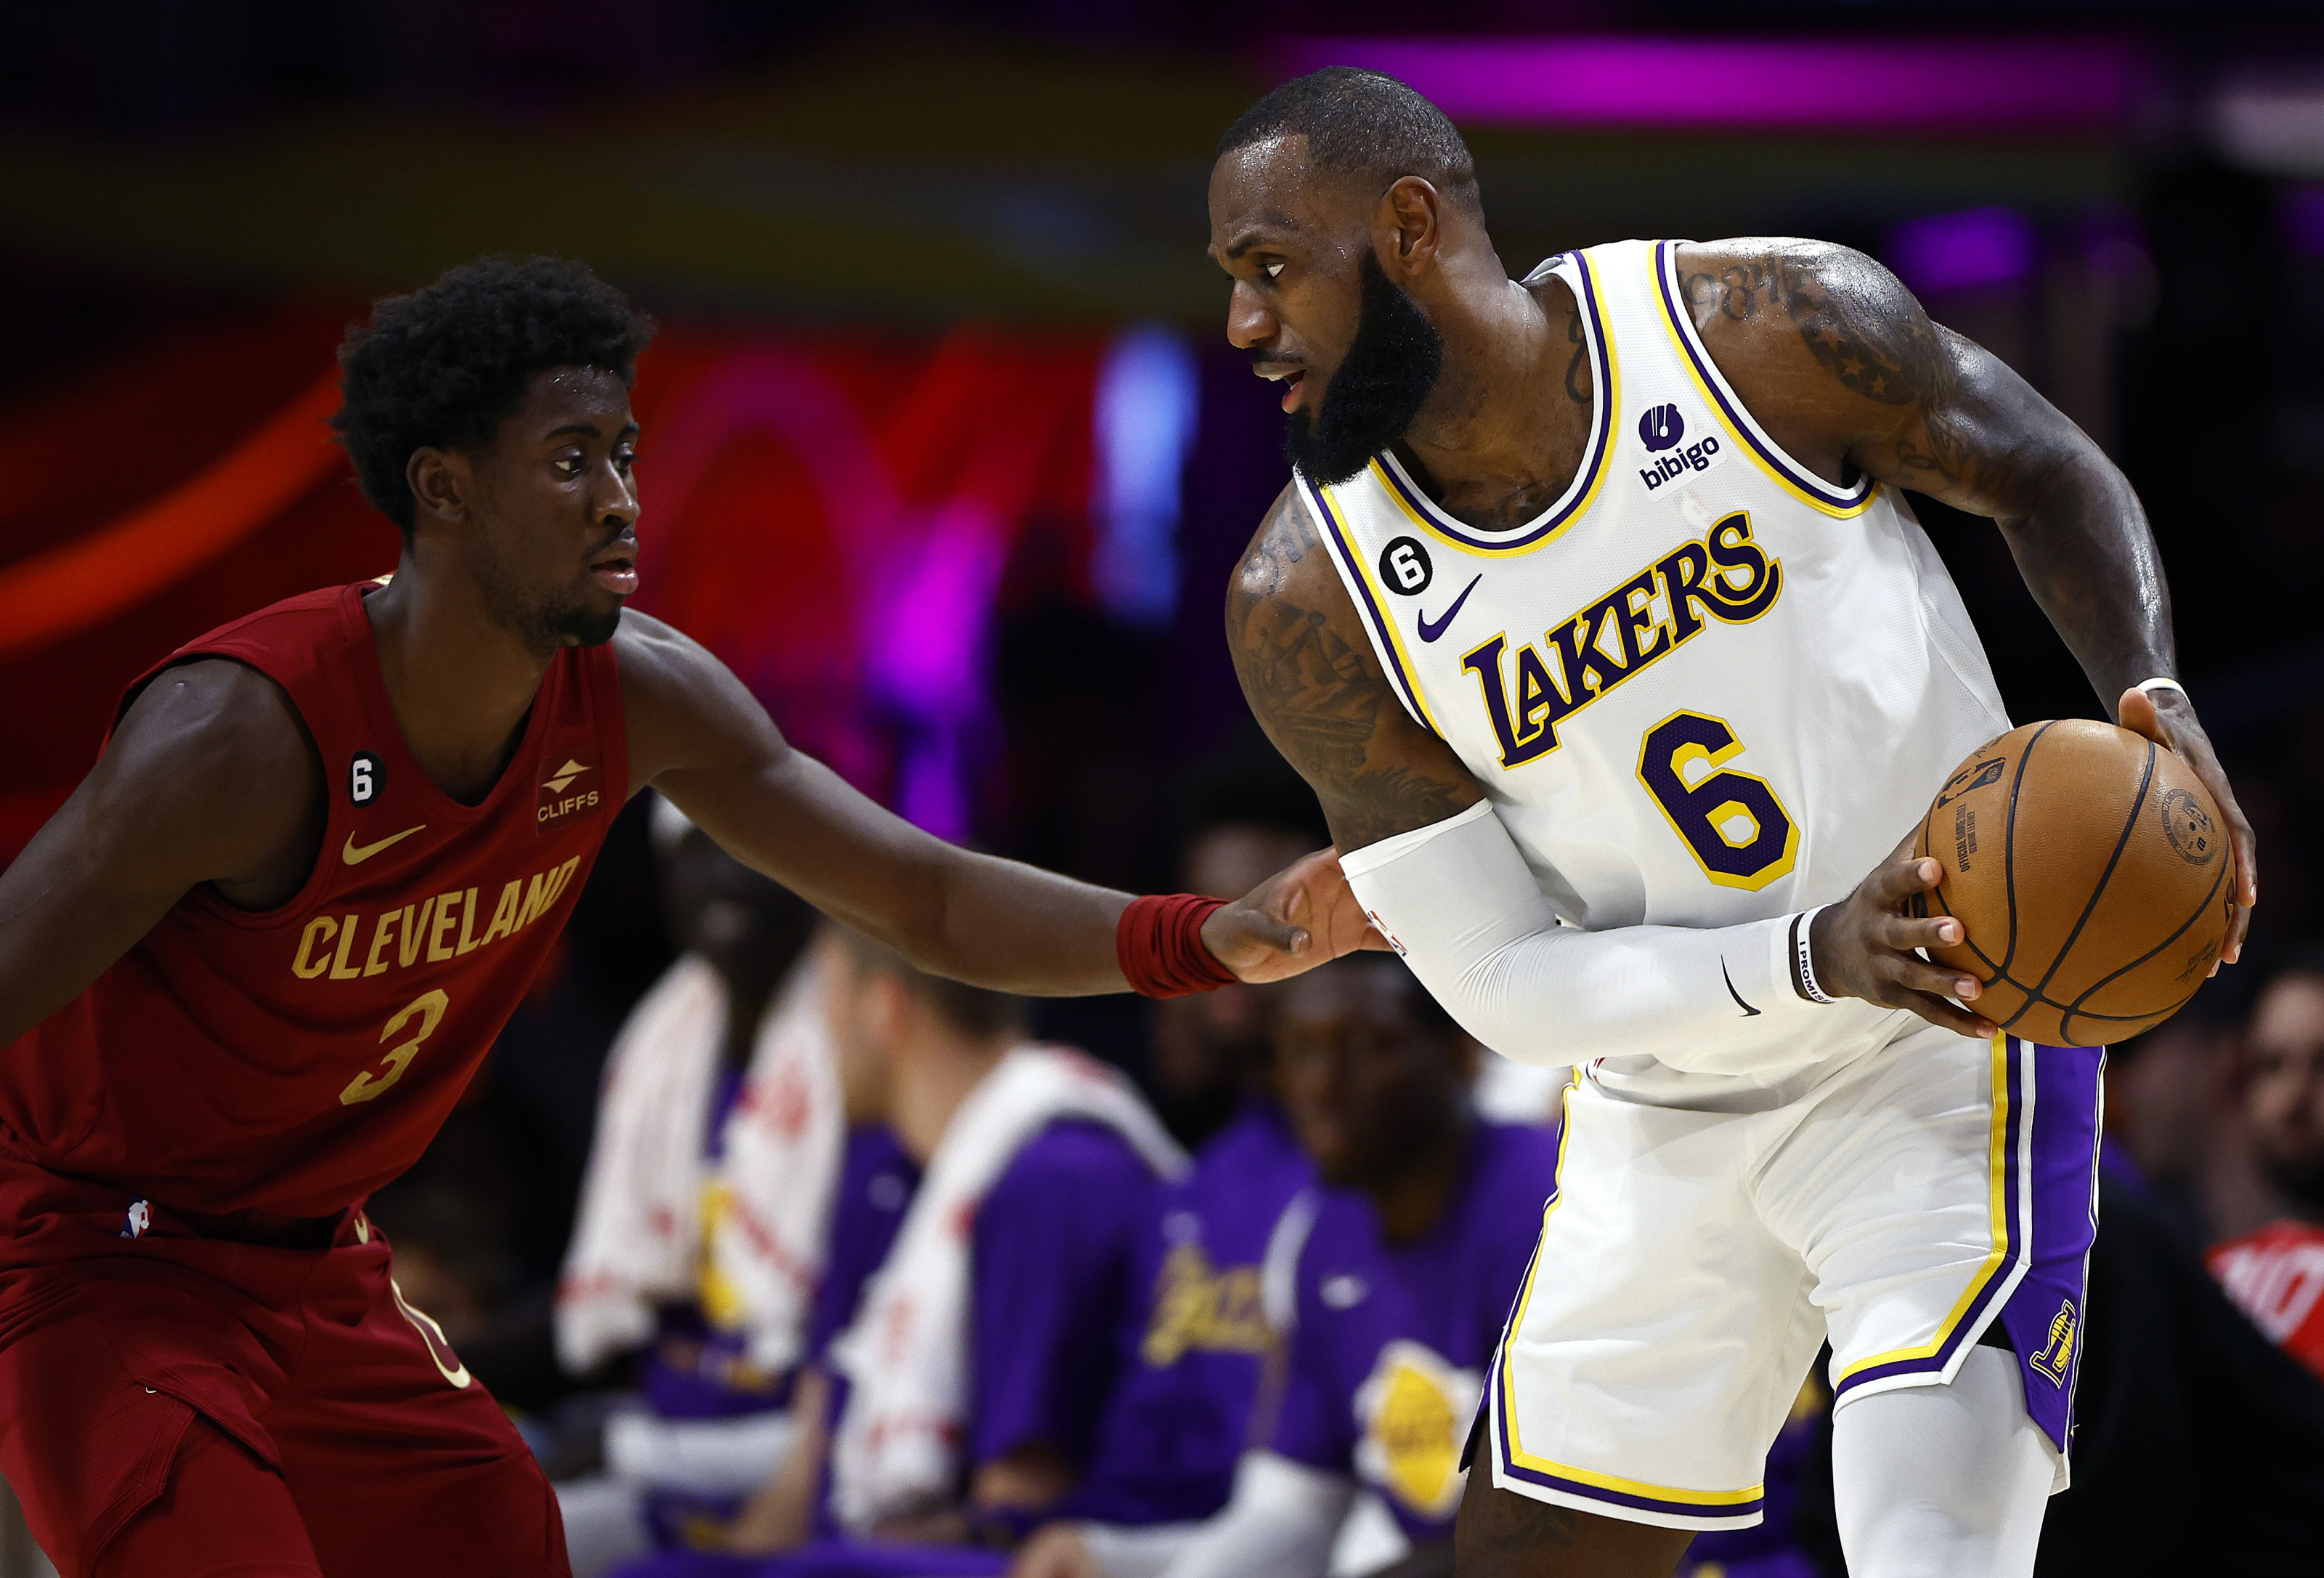 LeBron James agrees to two-year extension with Lakers